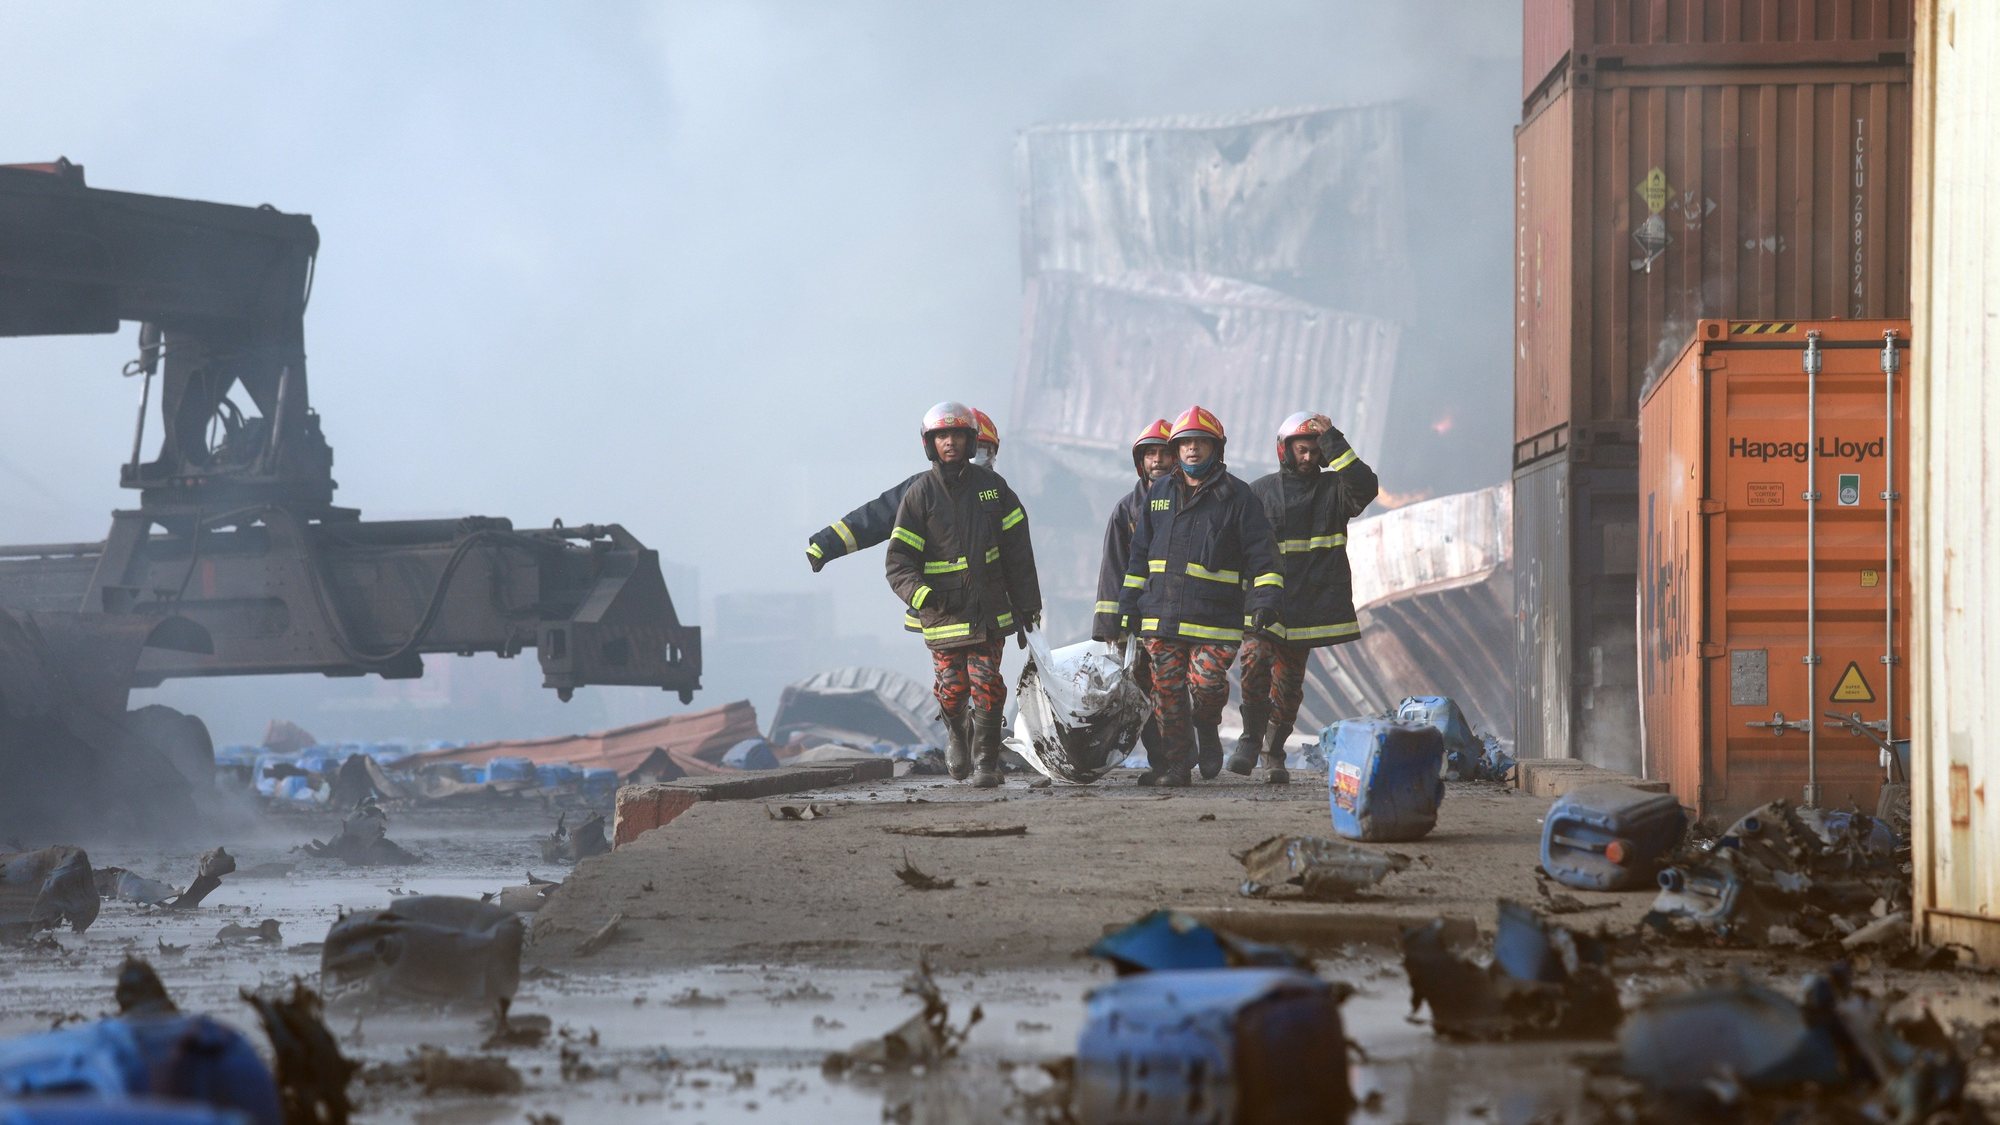 epa09996817 Firefighters shift body bags of victims of a massive fire at BM container depot in Shitalpur, Sitakunda Upazela, Chattogram, Bangladesh, 05 June 2022. At least 35 people are dead and over 450 are injured during a massive fire caused by an explosion at a private chemical container depot, according to the Fire services and the Police. The fire broke out at BM Container Limited in Shitalpur area in Chattogram around 10 pm last night, 29 firefighter units worked to put out the fire.  EPA/STR